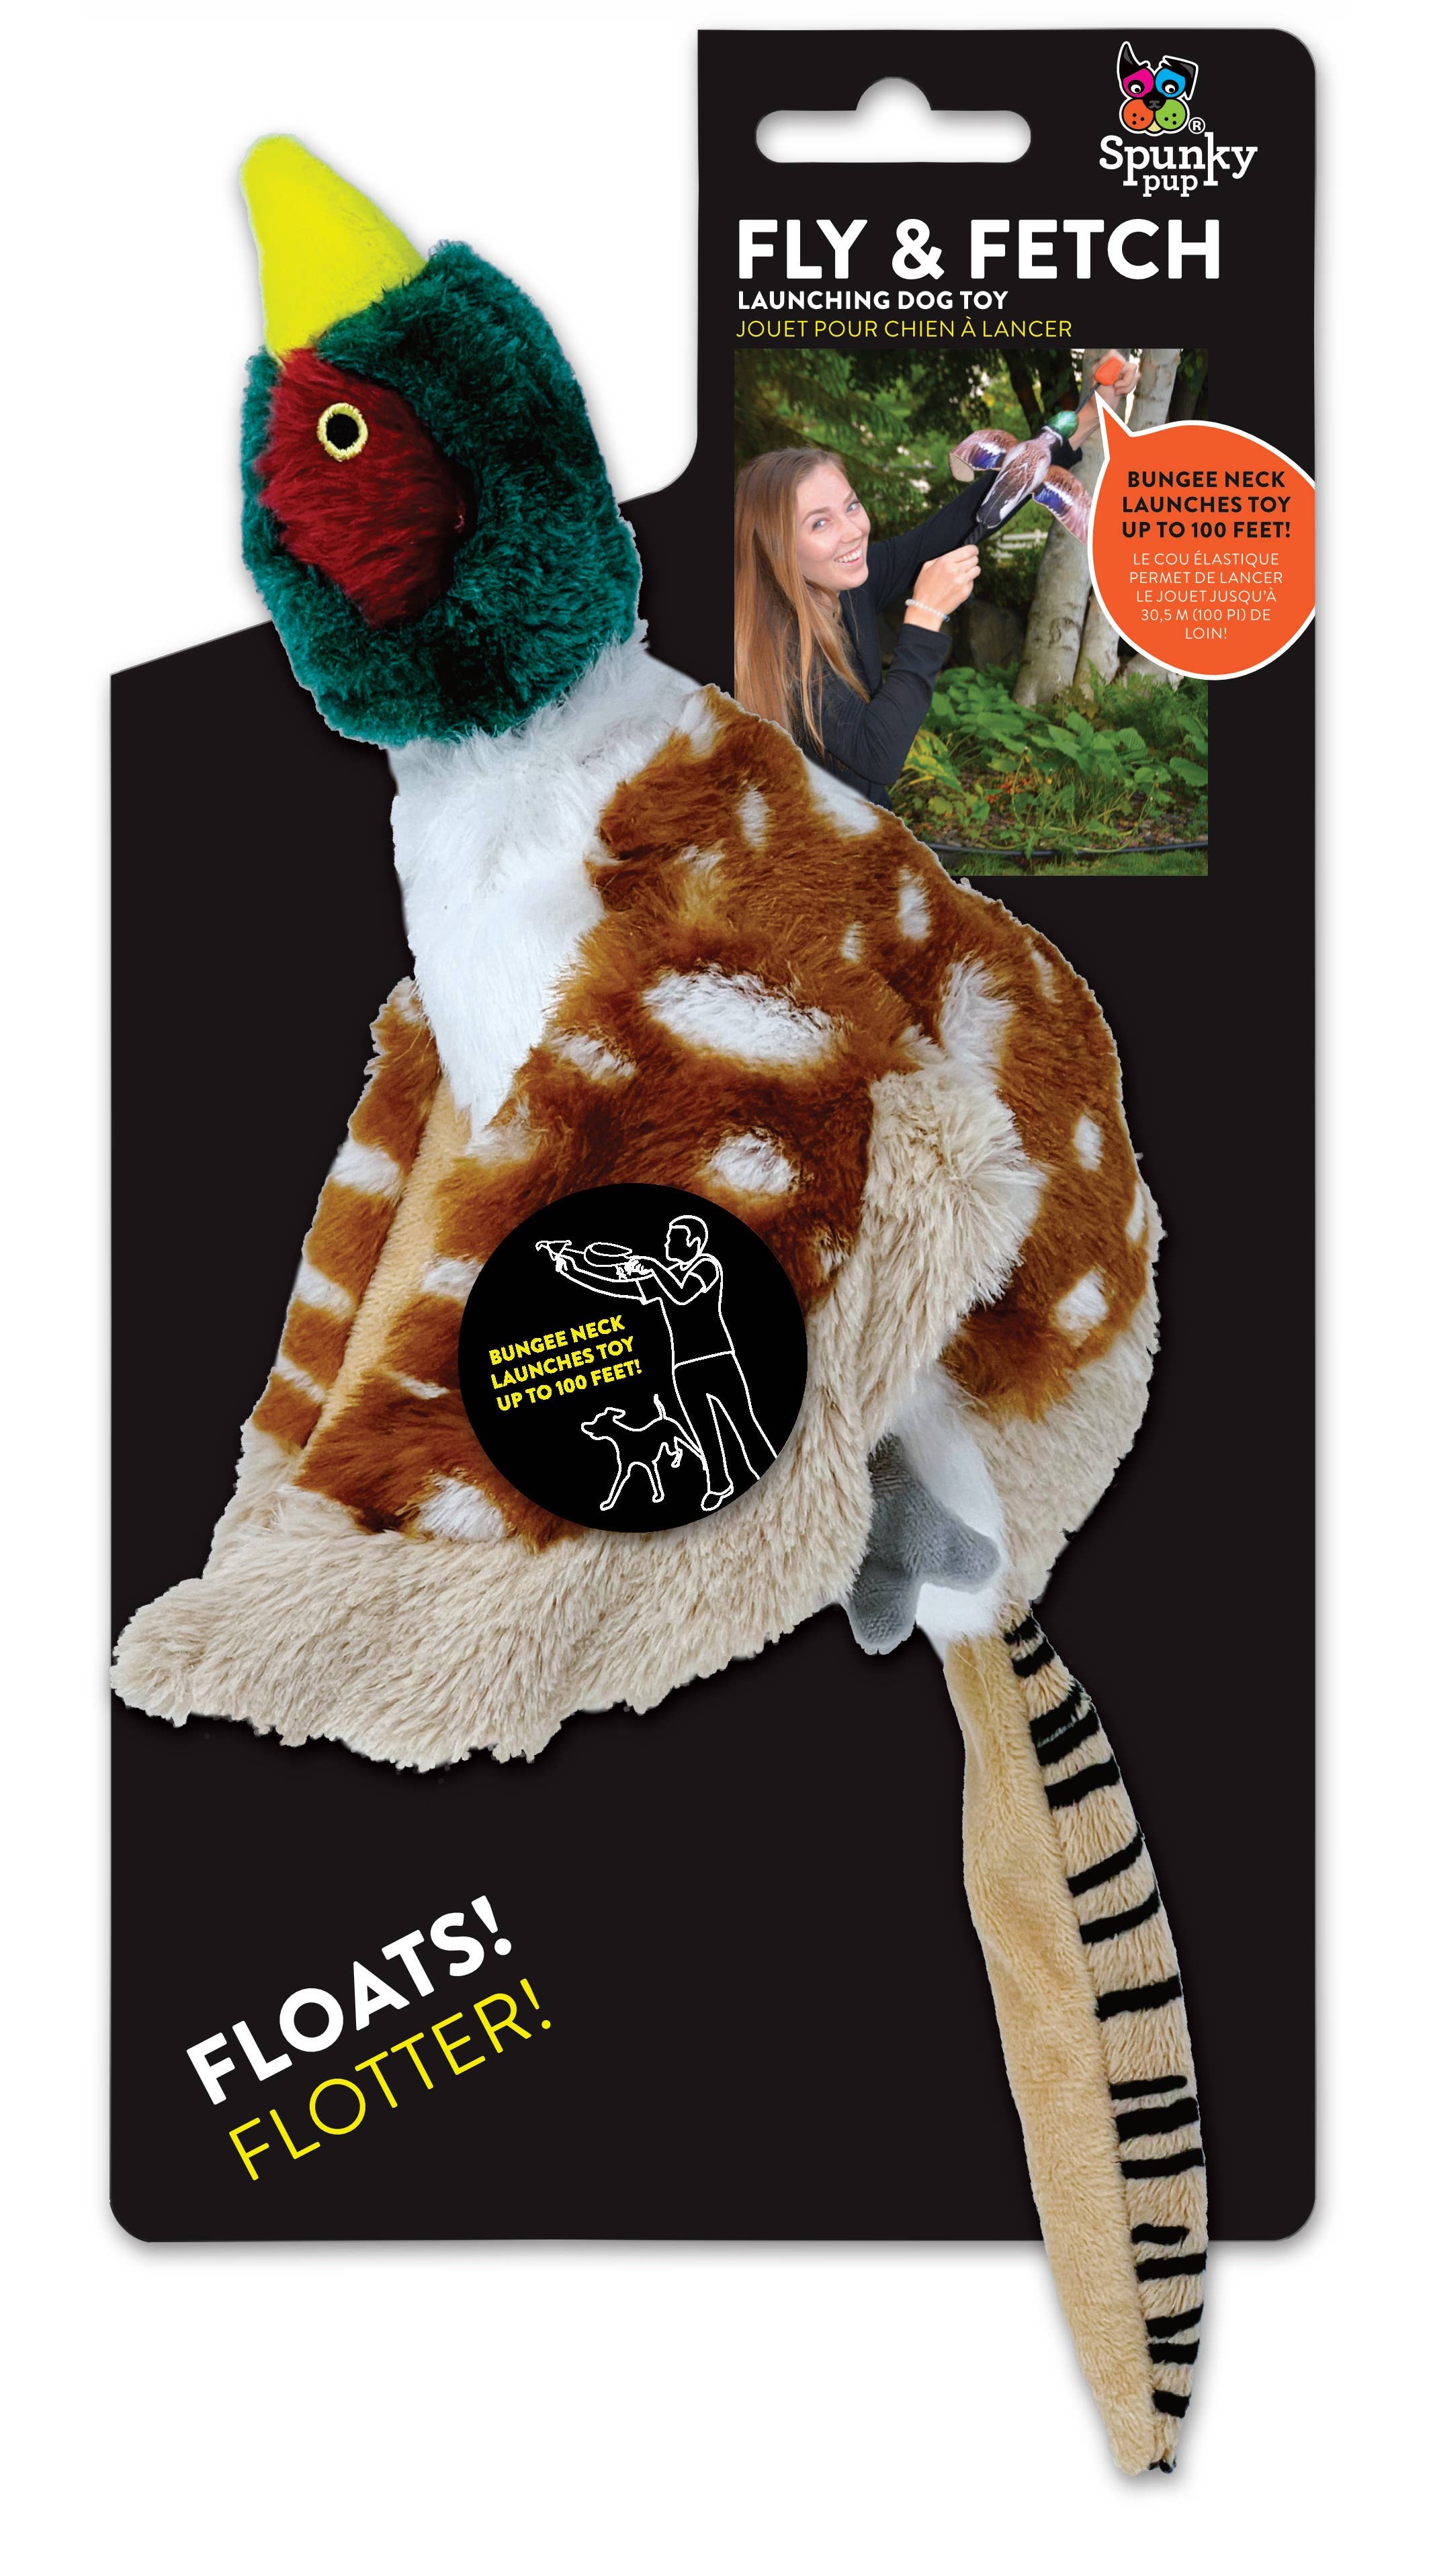 Spunky Pup Dog Toys - Fly & Fetch Launching Toys - Pheasant